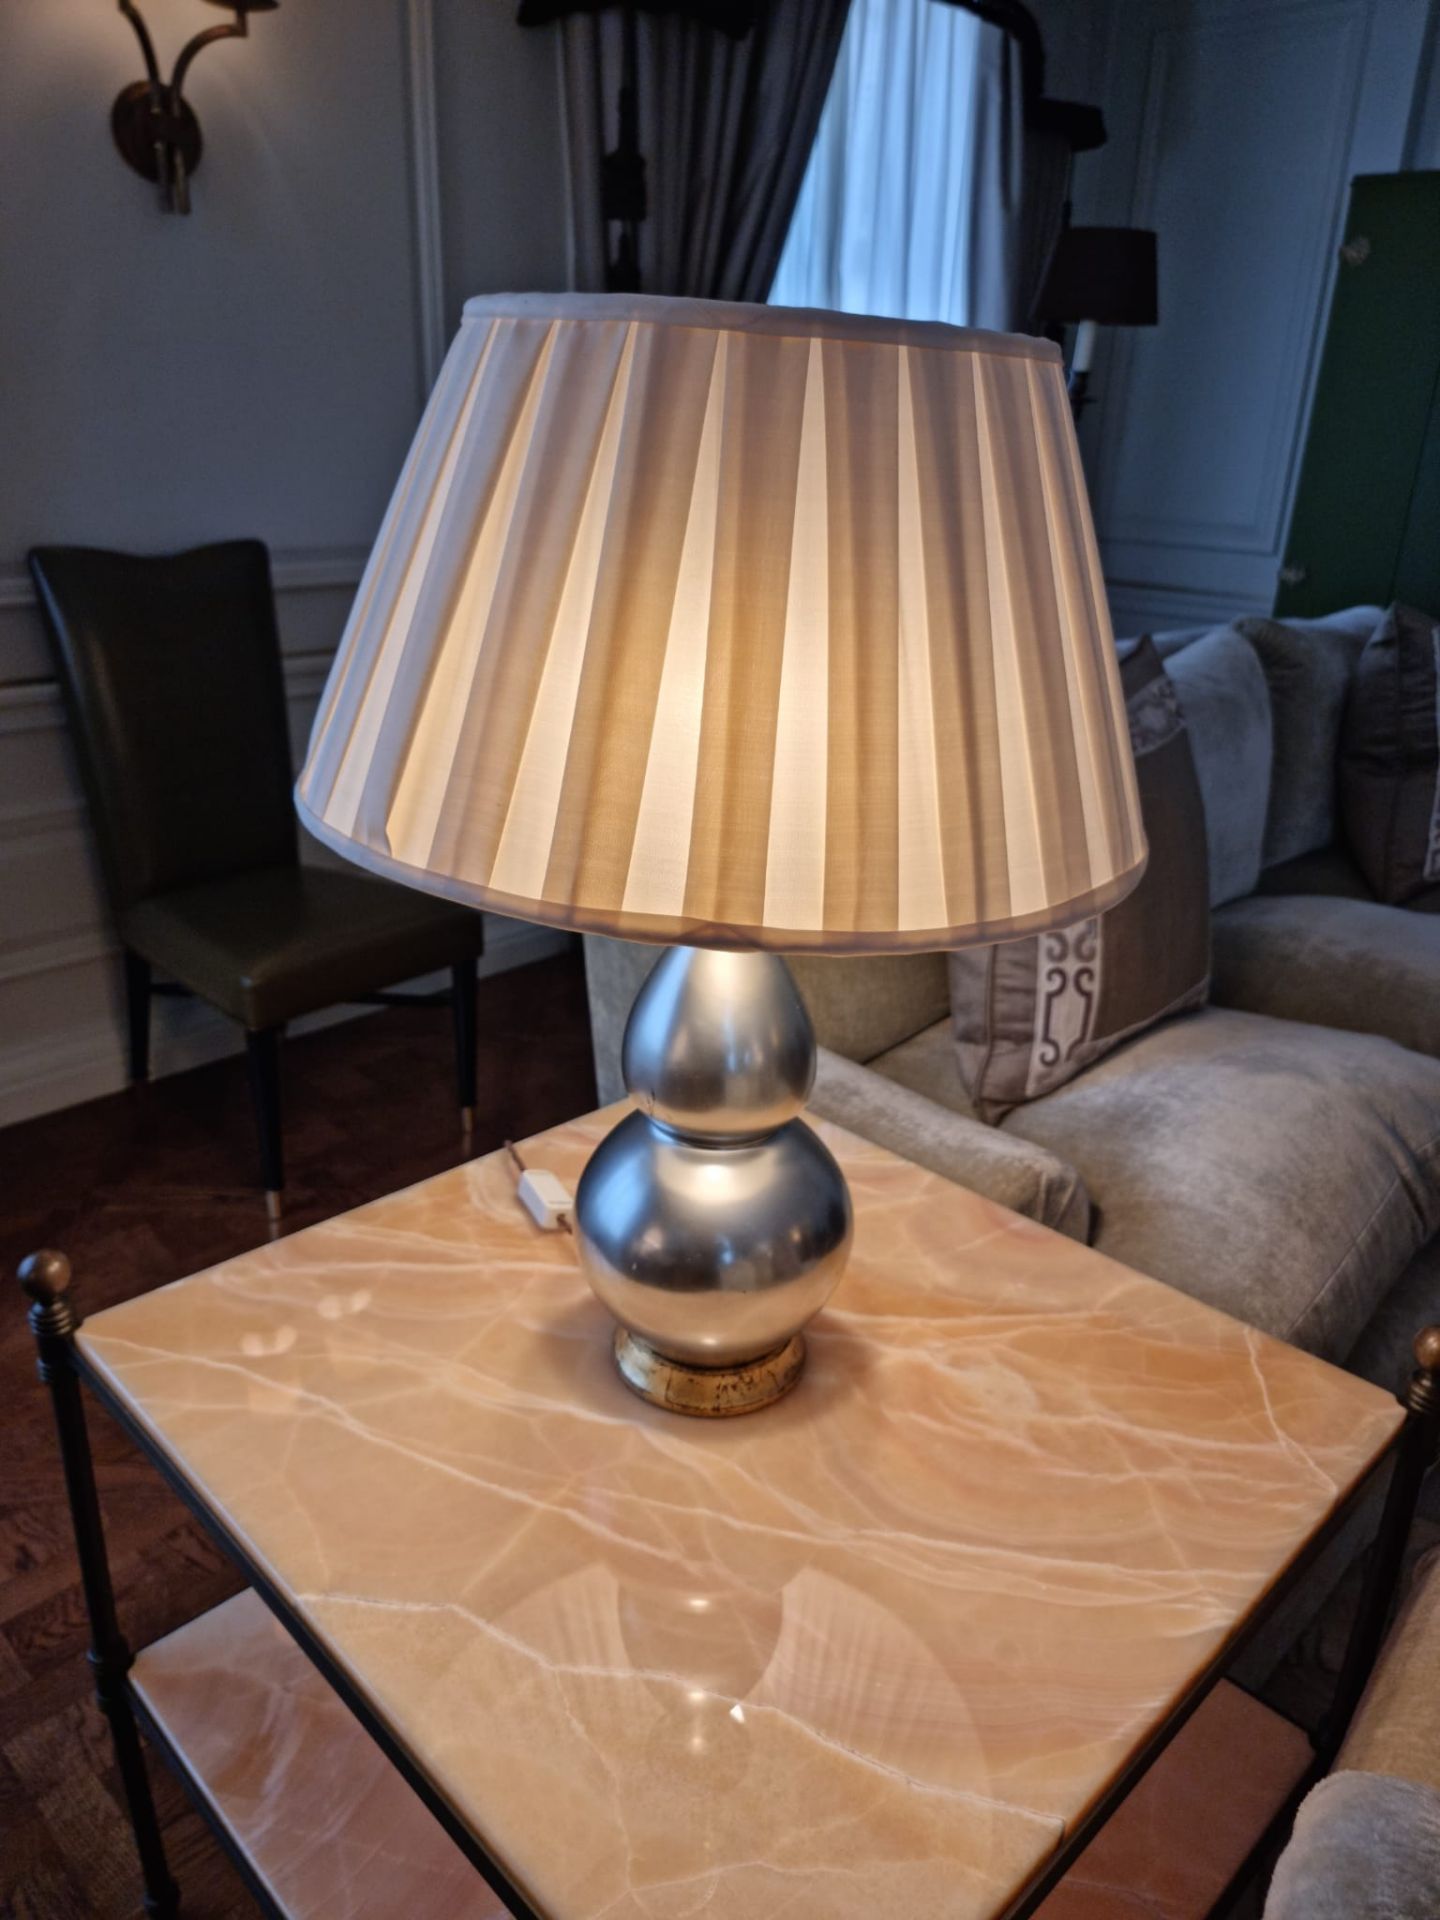 Heathfield And Co Gourd Textured Ceramic Table Lamp With Shade 70cm (Room 206/7) - Image 2 of 2